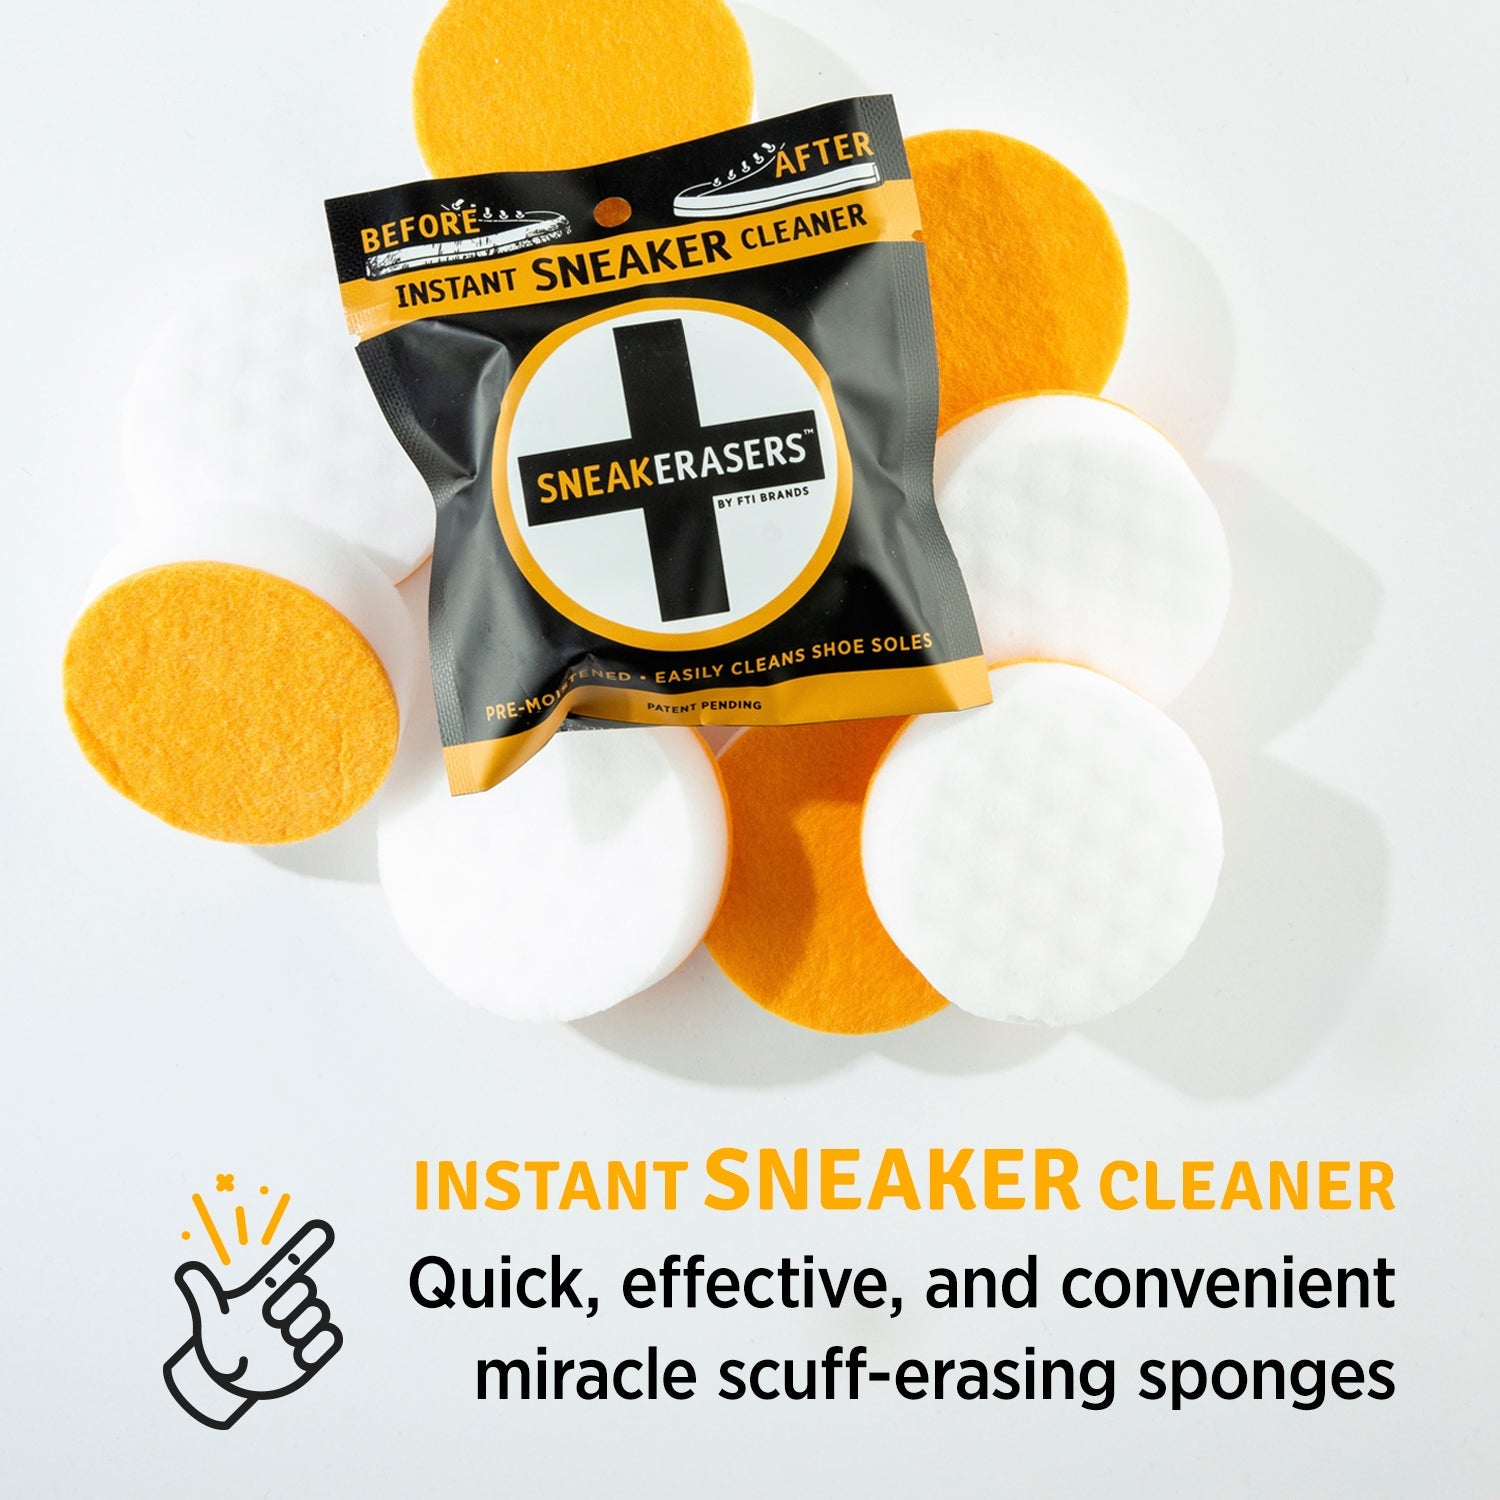 FIONEL Shoes Multifunctional Cleaning Cream,Sneaker Erasers,White Shoe Cleaner,Leather Shoe Cleaner,White Shoe Cleaning Cream with Sponge Eraser (1pcs)